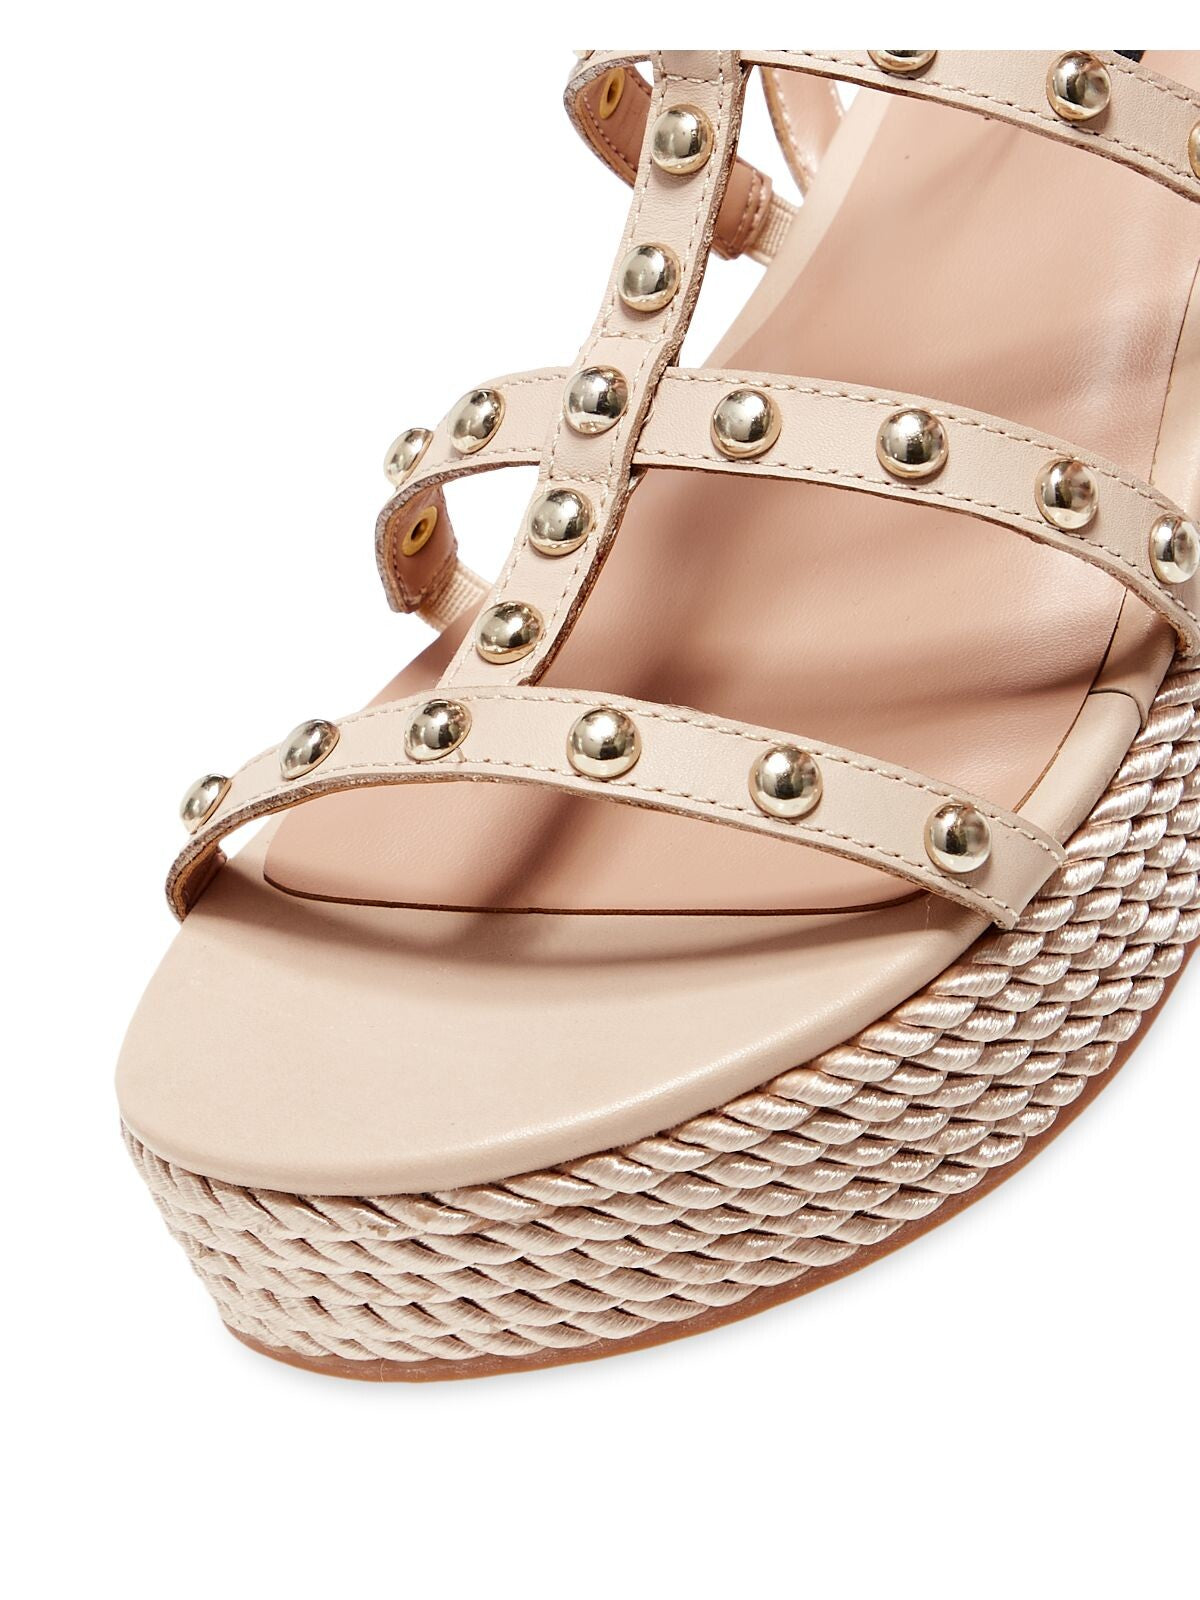 AQUA Womens Beige 1-1/2" Platform Studded Strappy Kimm Round Toe Wedge Buckle Leather Gladiator Sandals Shoes M